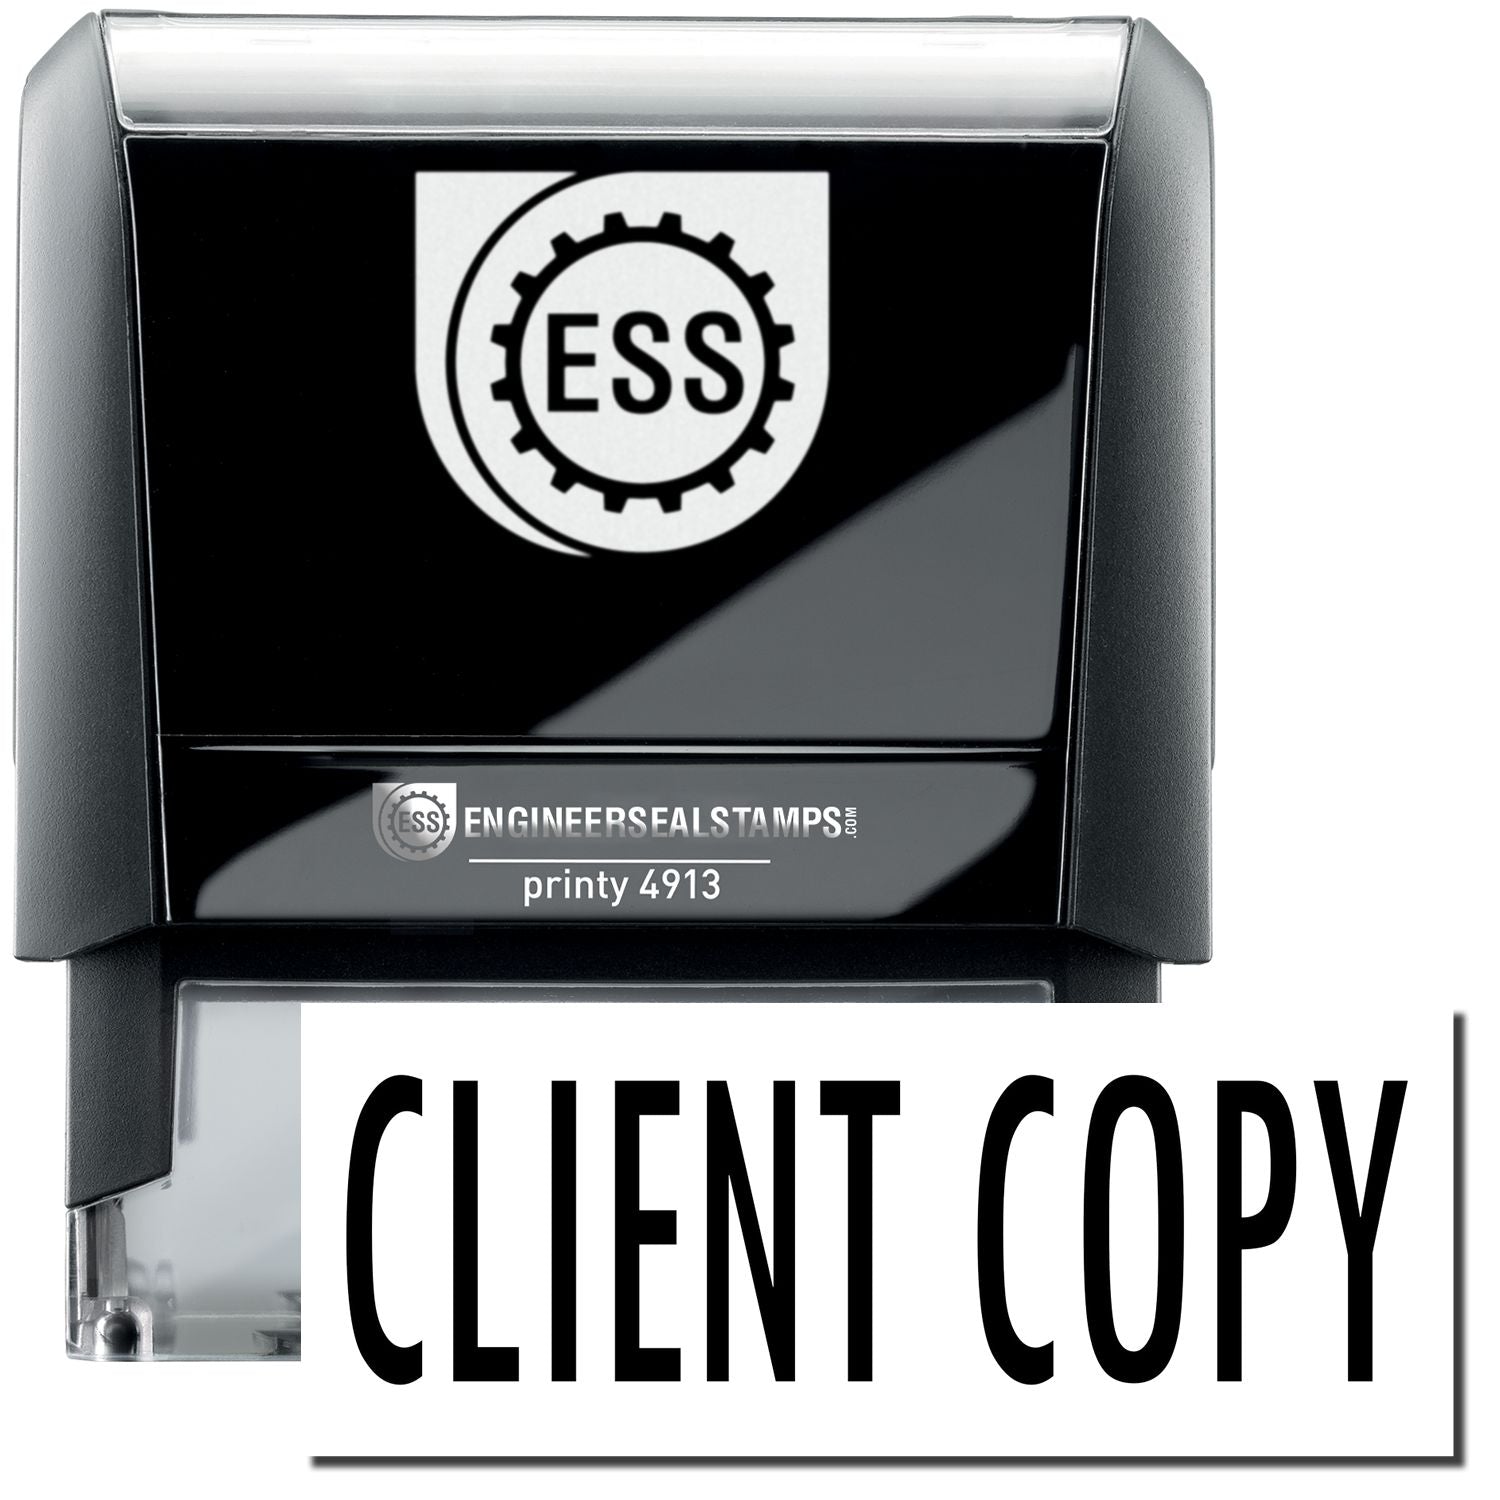 A large self-inking stamp with a stamped image showing how the text "CLIENT COPY" in a large bold font is displayed by it.